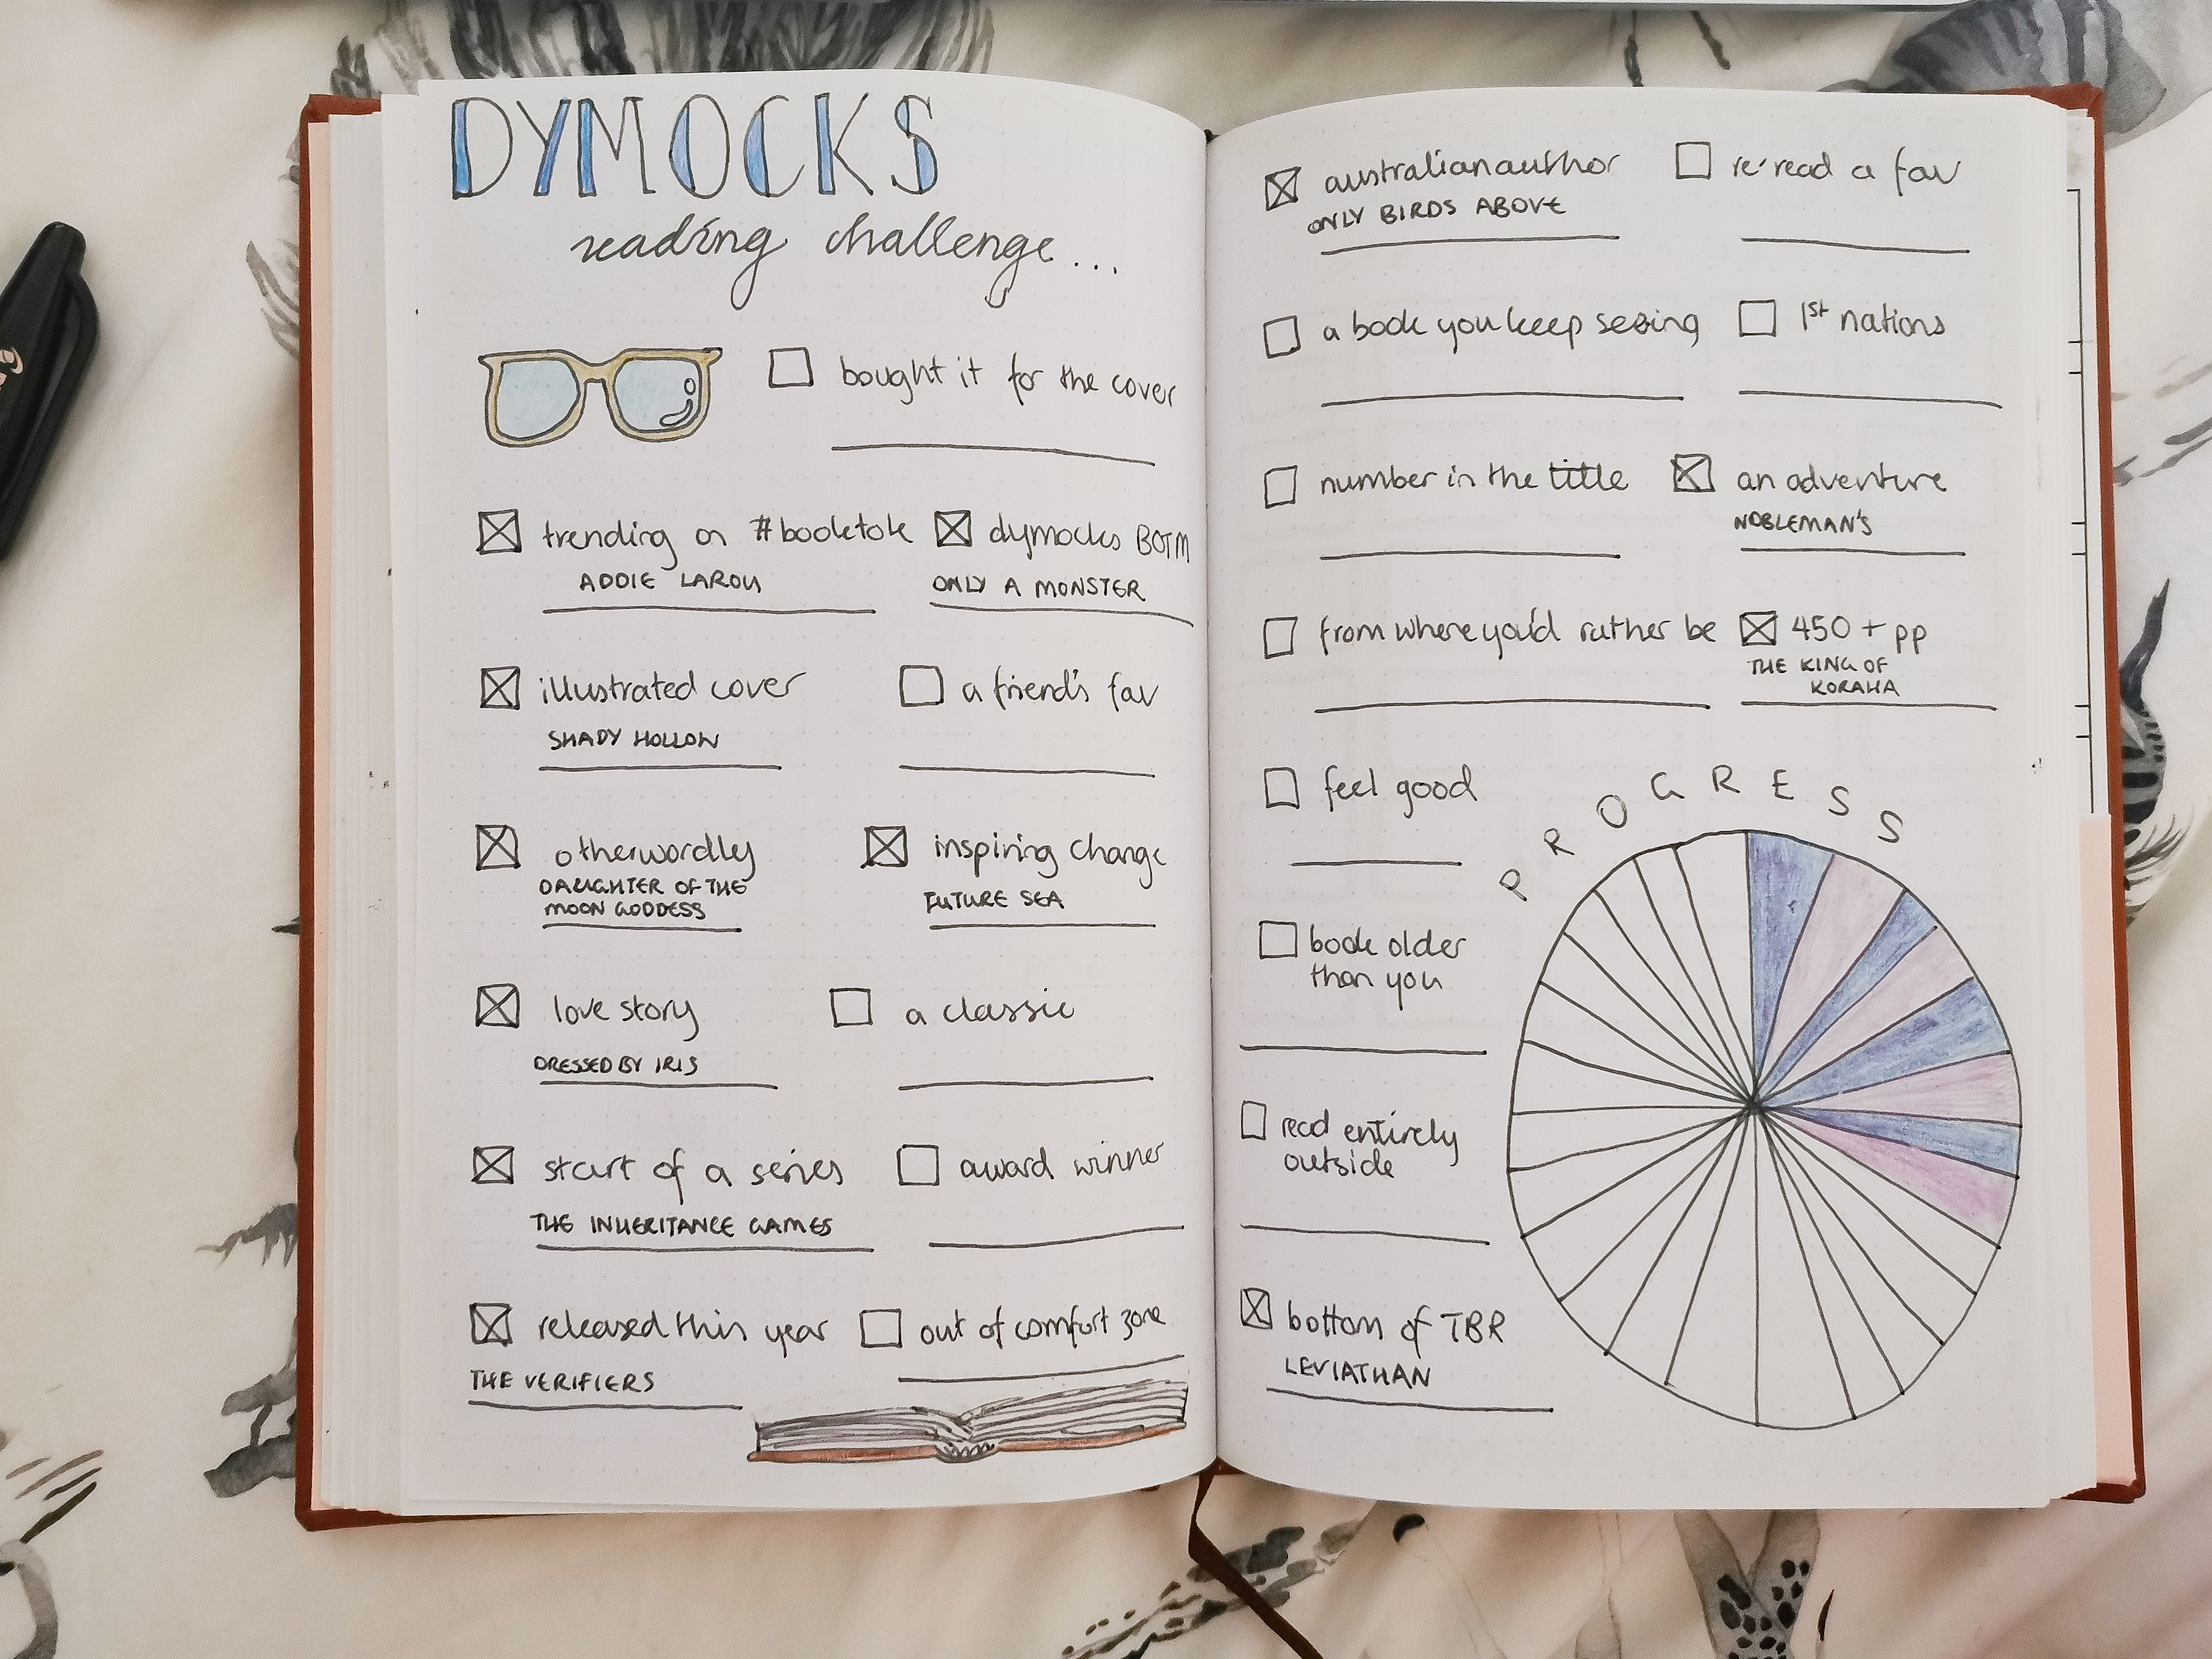 How to set up a reading journal